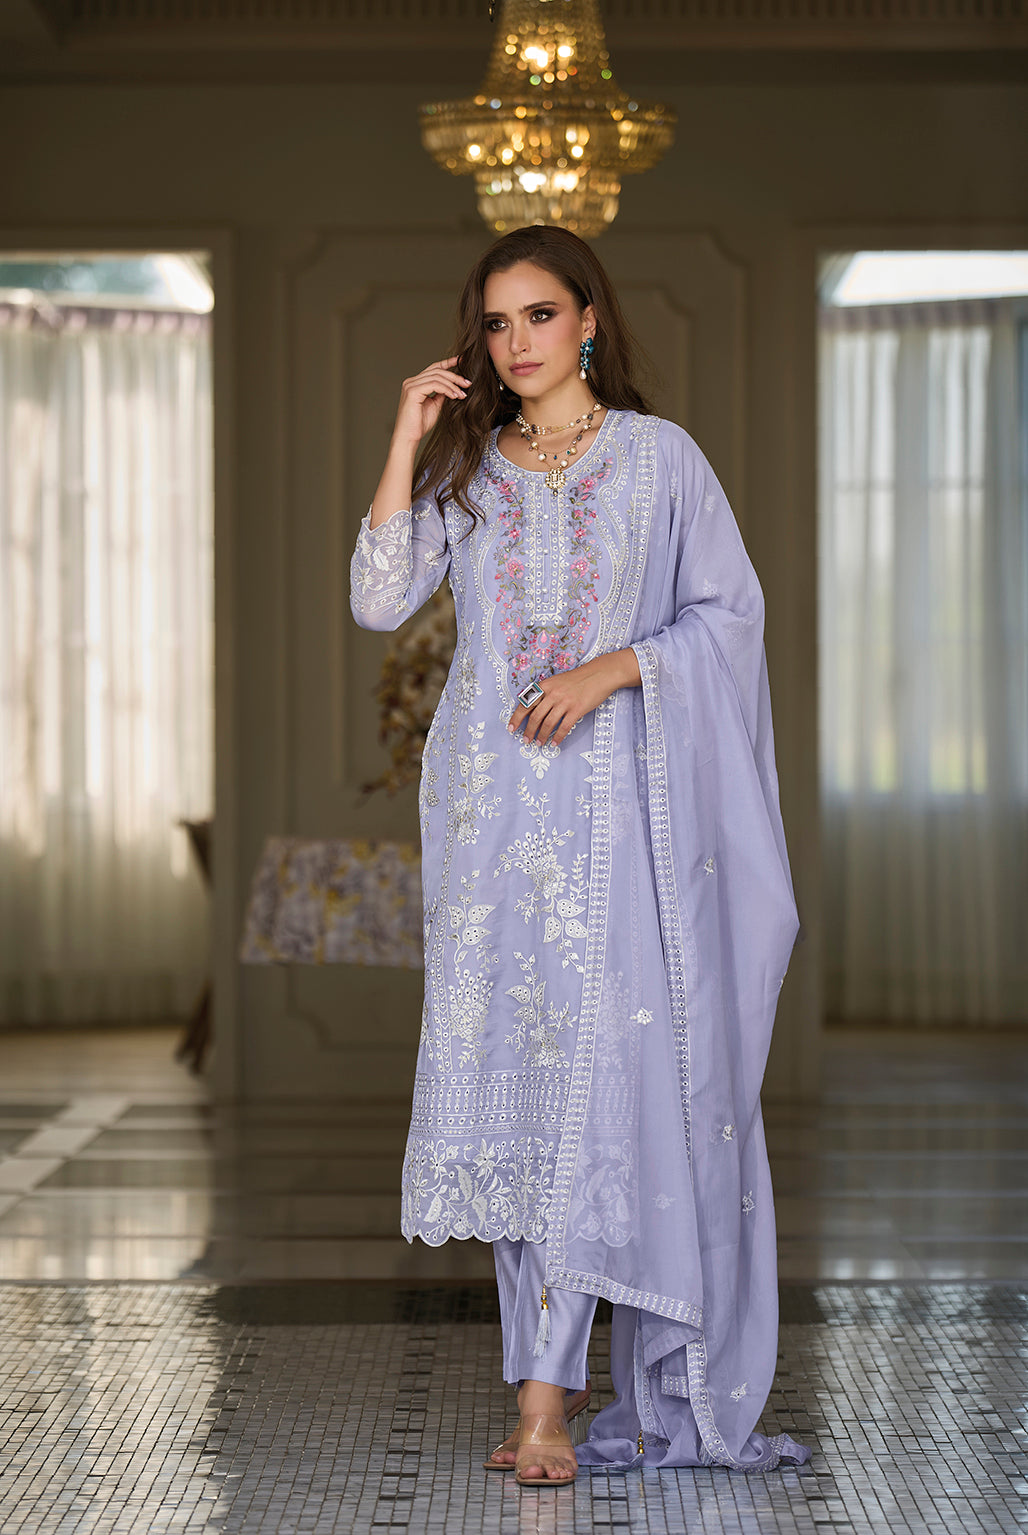 Pakistani Suits - Buy Pakistani Suits Online Starting at Just ₹397